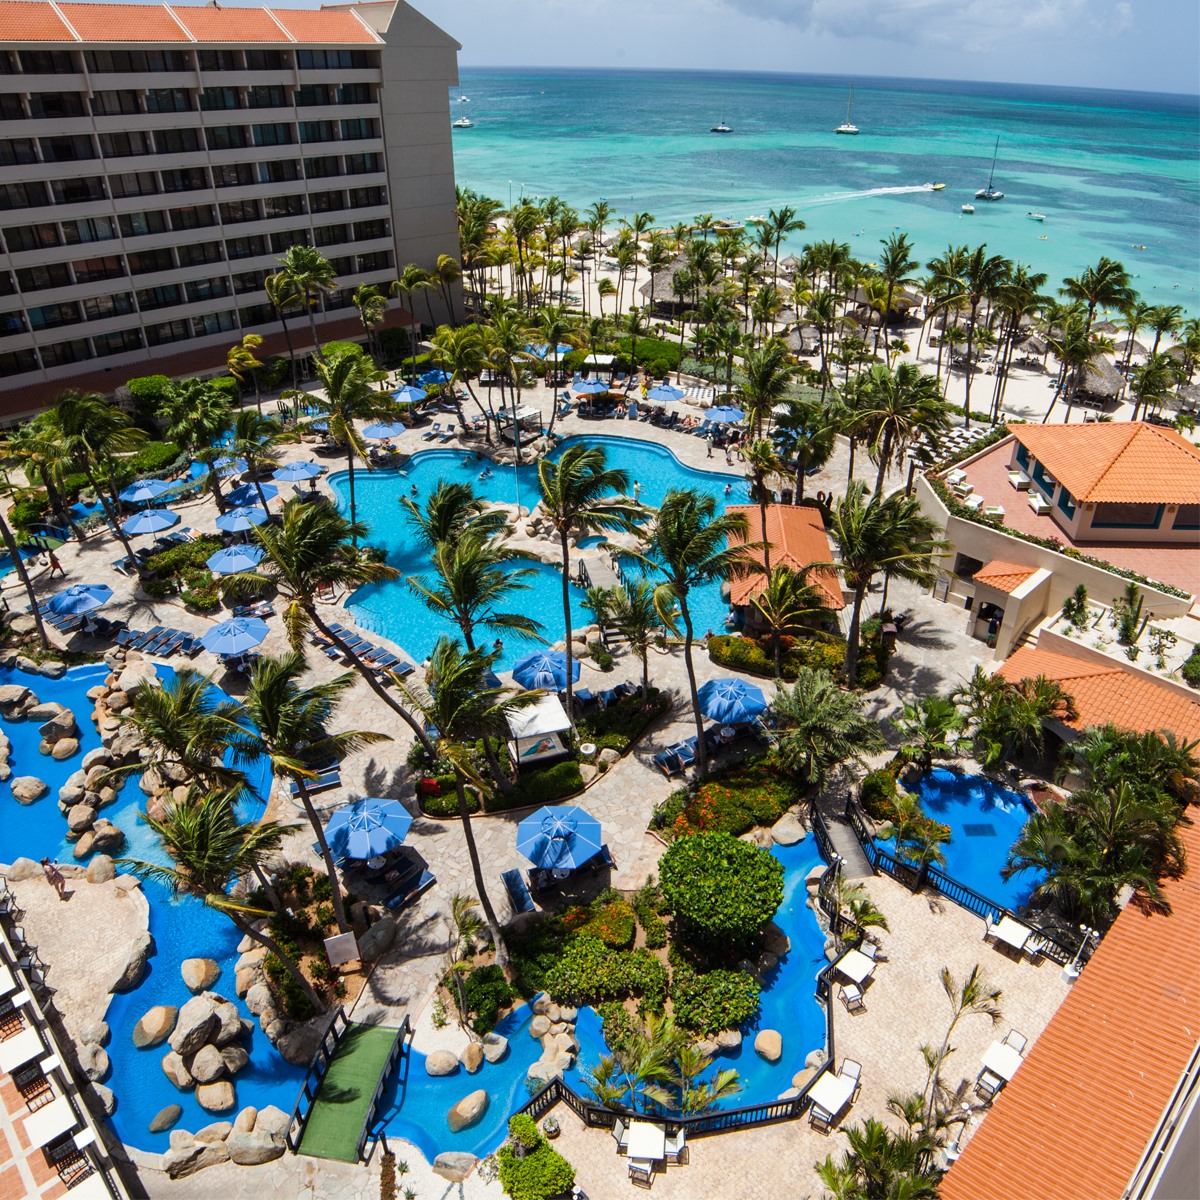 Top Best All-Inclusive Resorts & Vacation Packages in Aruba